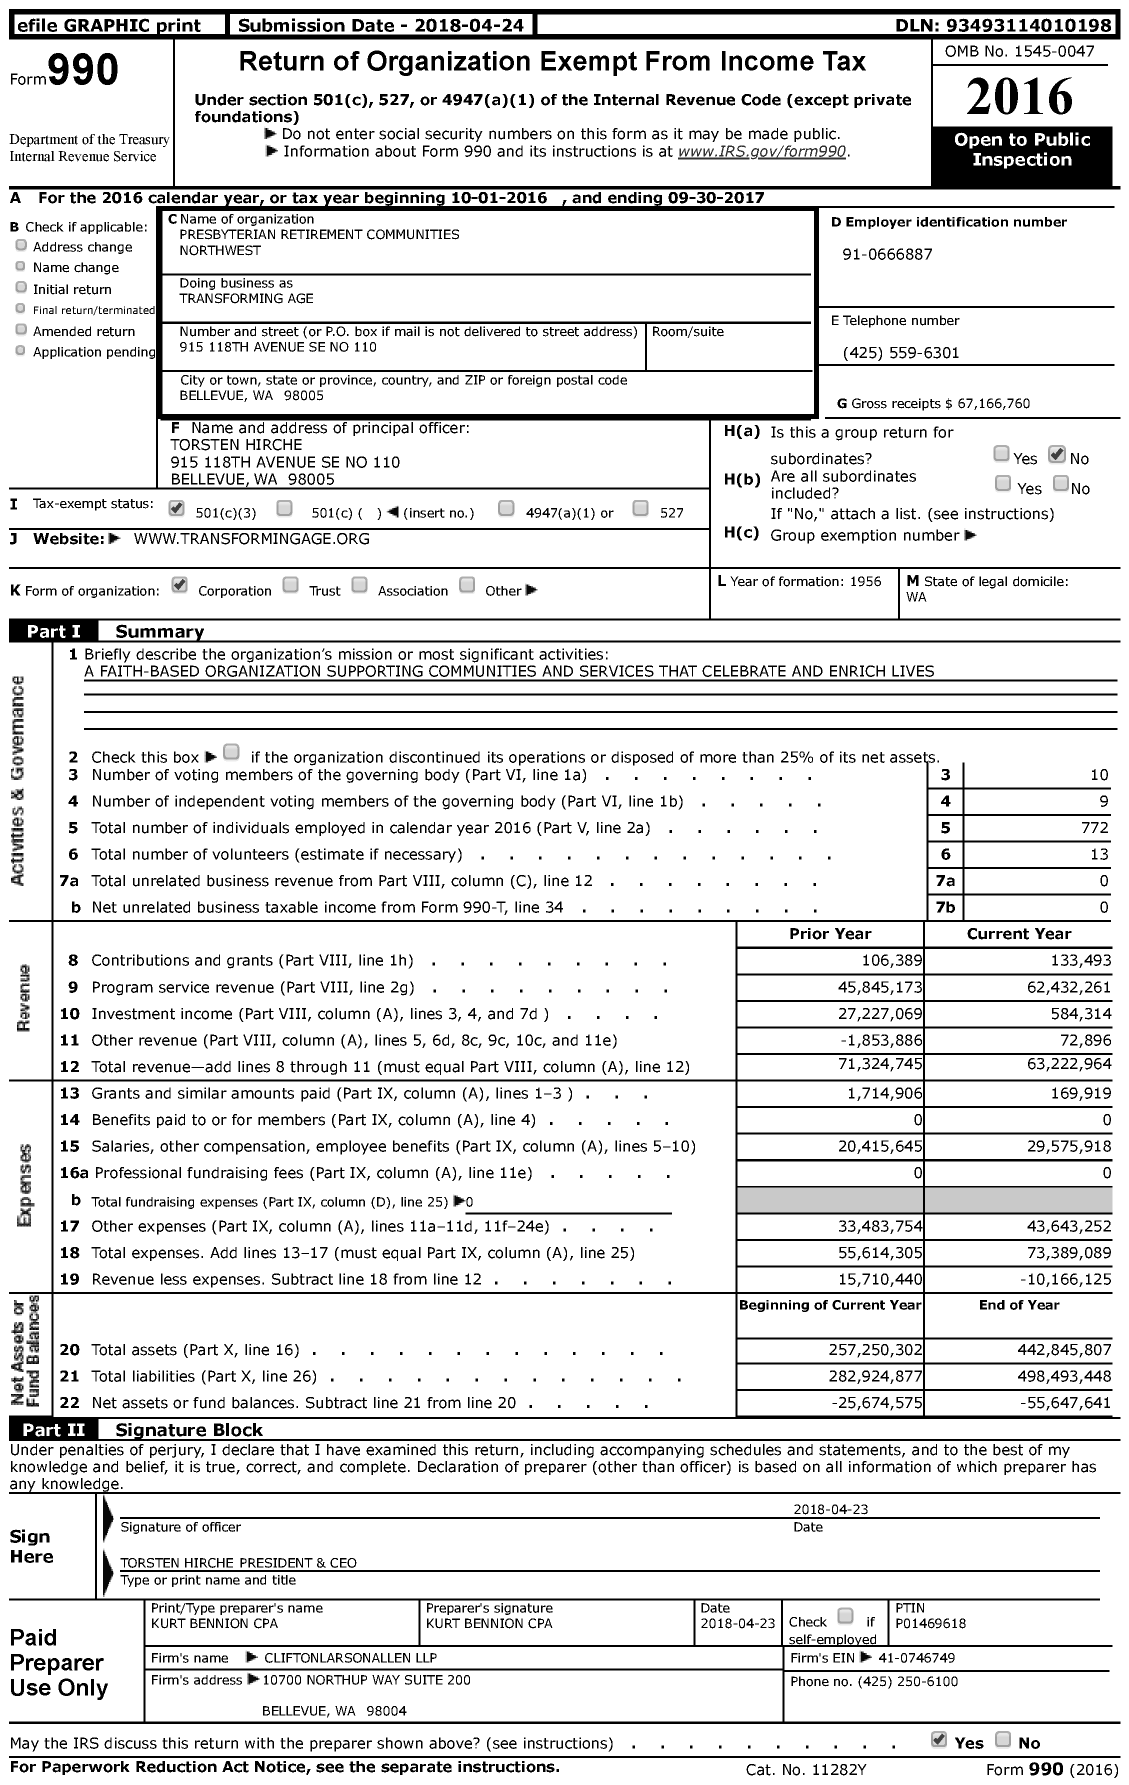 Image of first page of 2016 Form 990 for Transforming Age (PRCN)